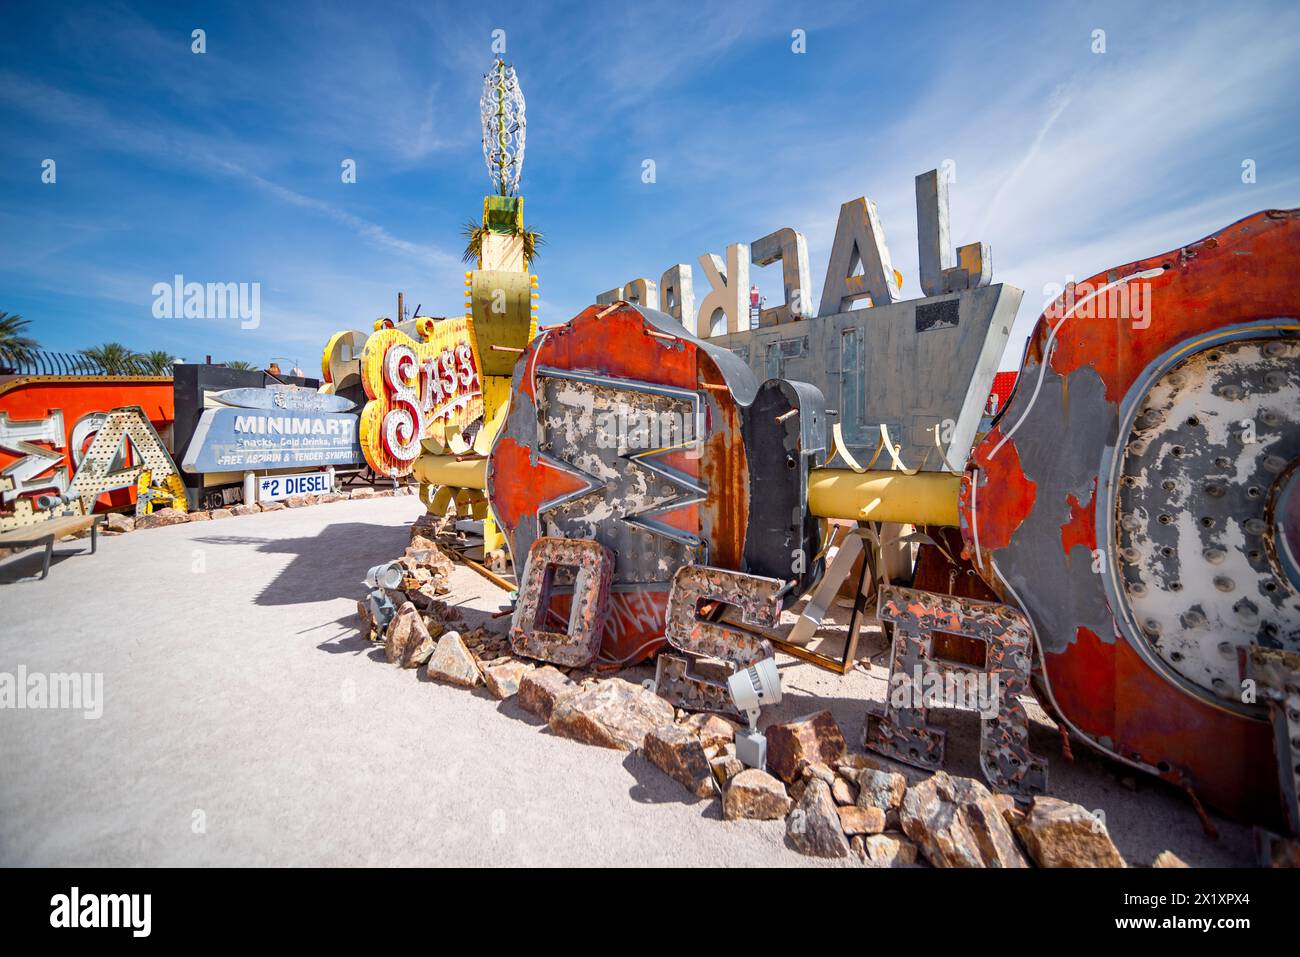 Abandoned and discarded signs in the Neon Museum aka Neon boneyard in Las Vegas, Nevada. Stock Photo